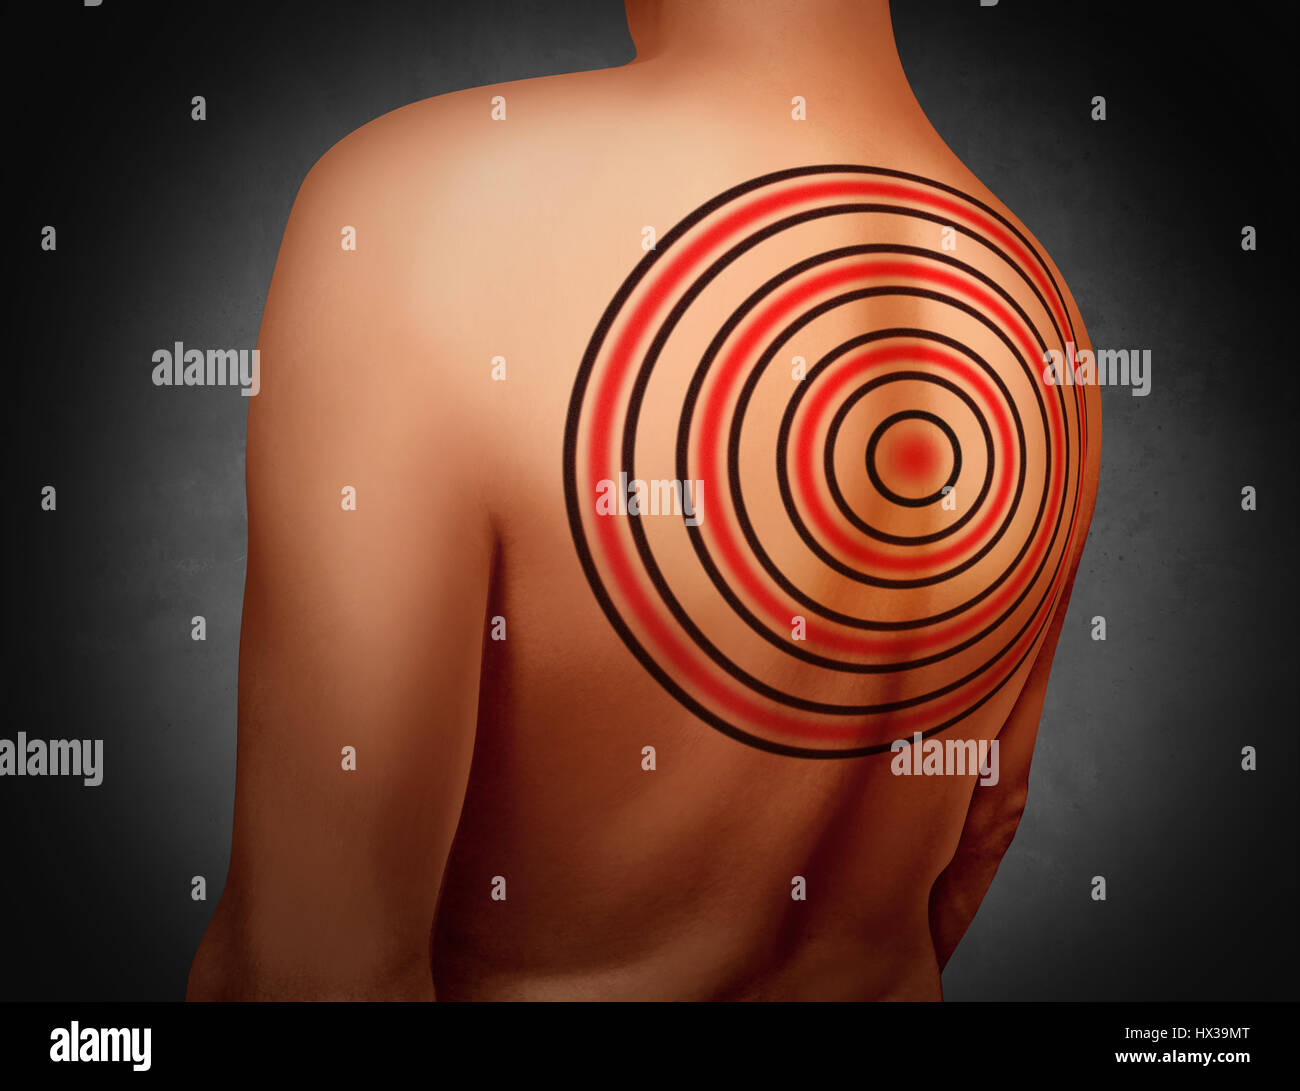 Target on your back metaphor as a person with a tattoo of a bulls eye symbol tattooed on the skin as an icon for being a victim of bullying. Stock Photo